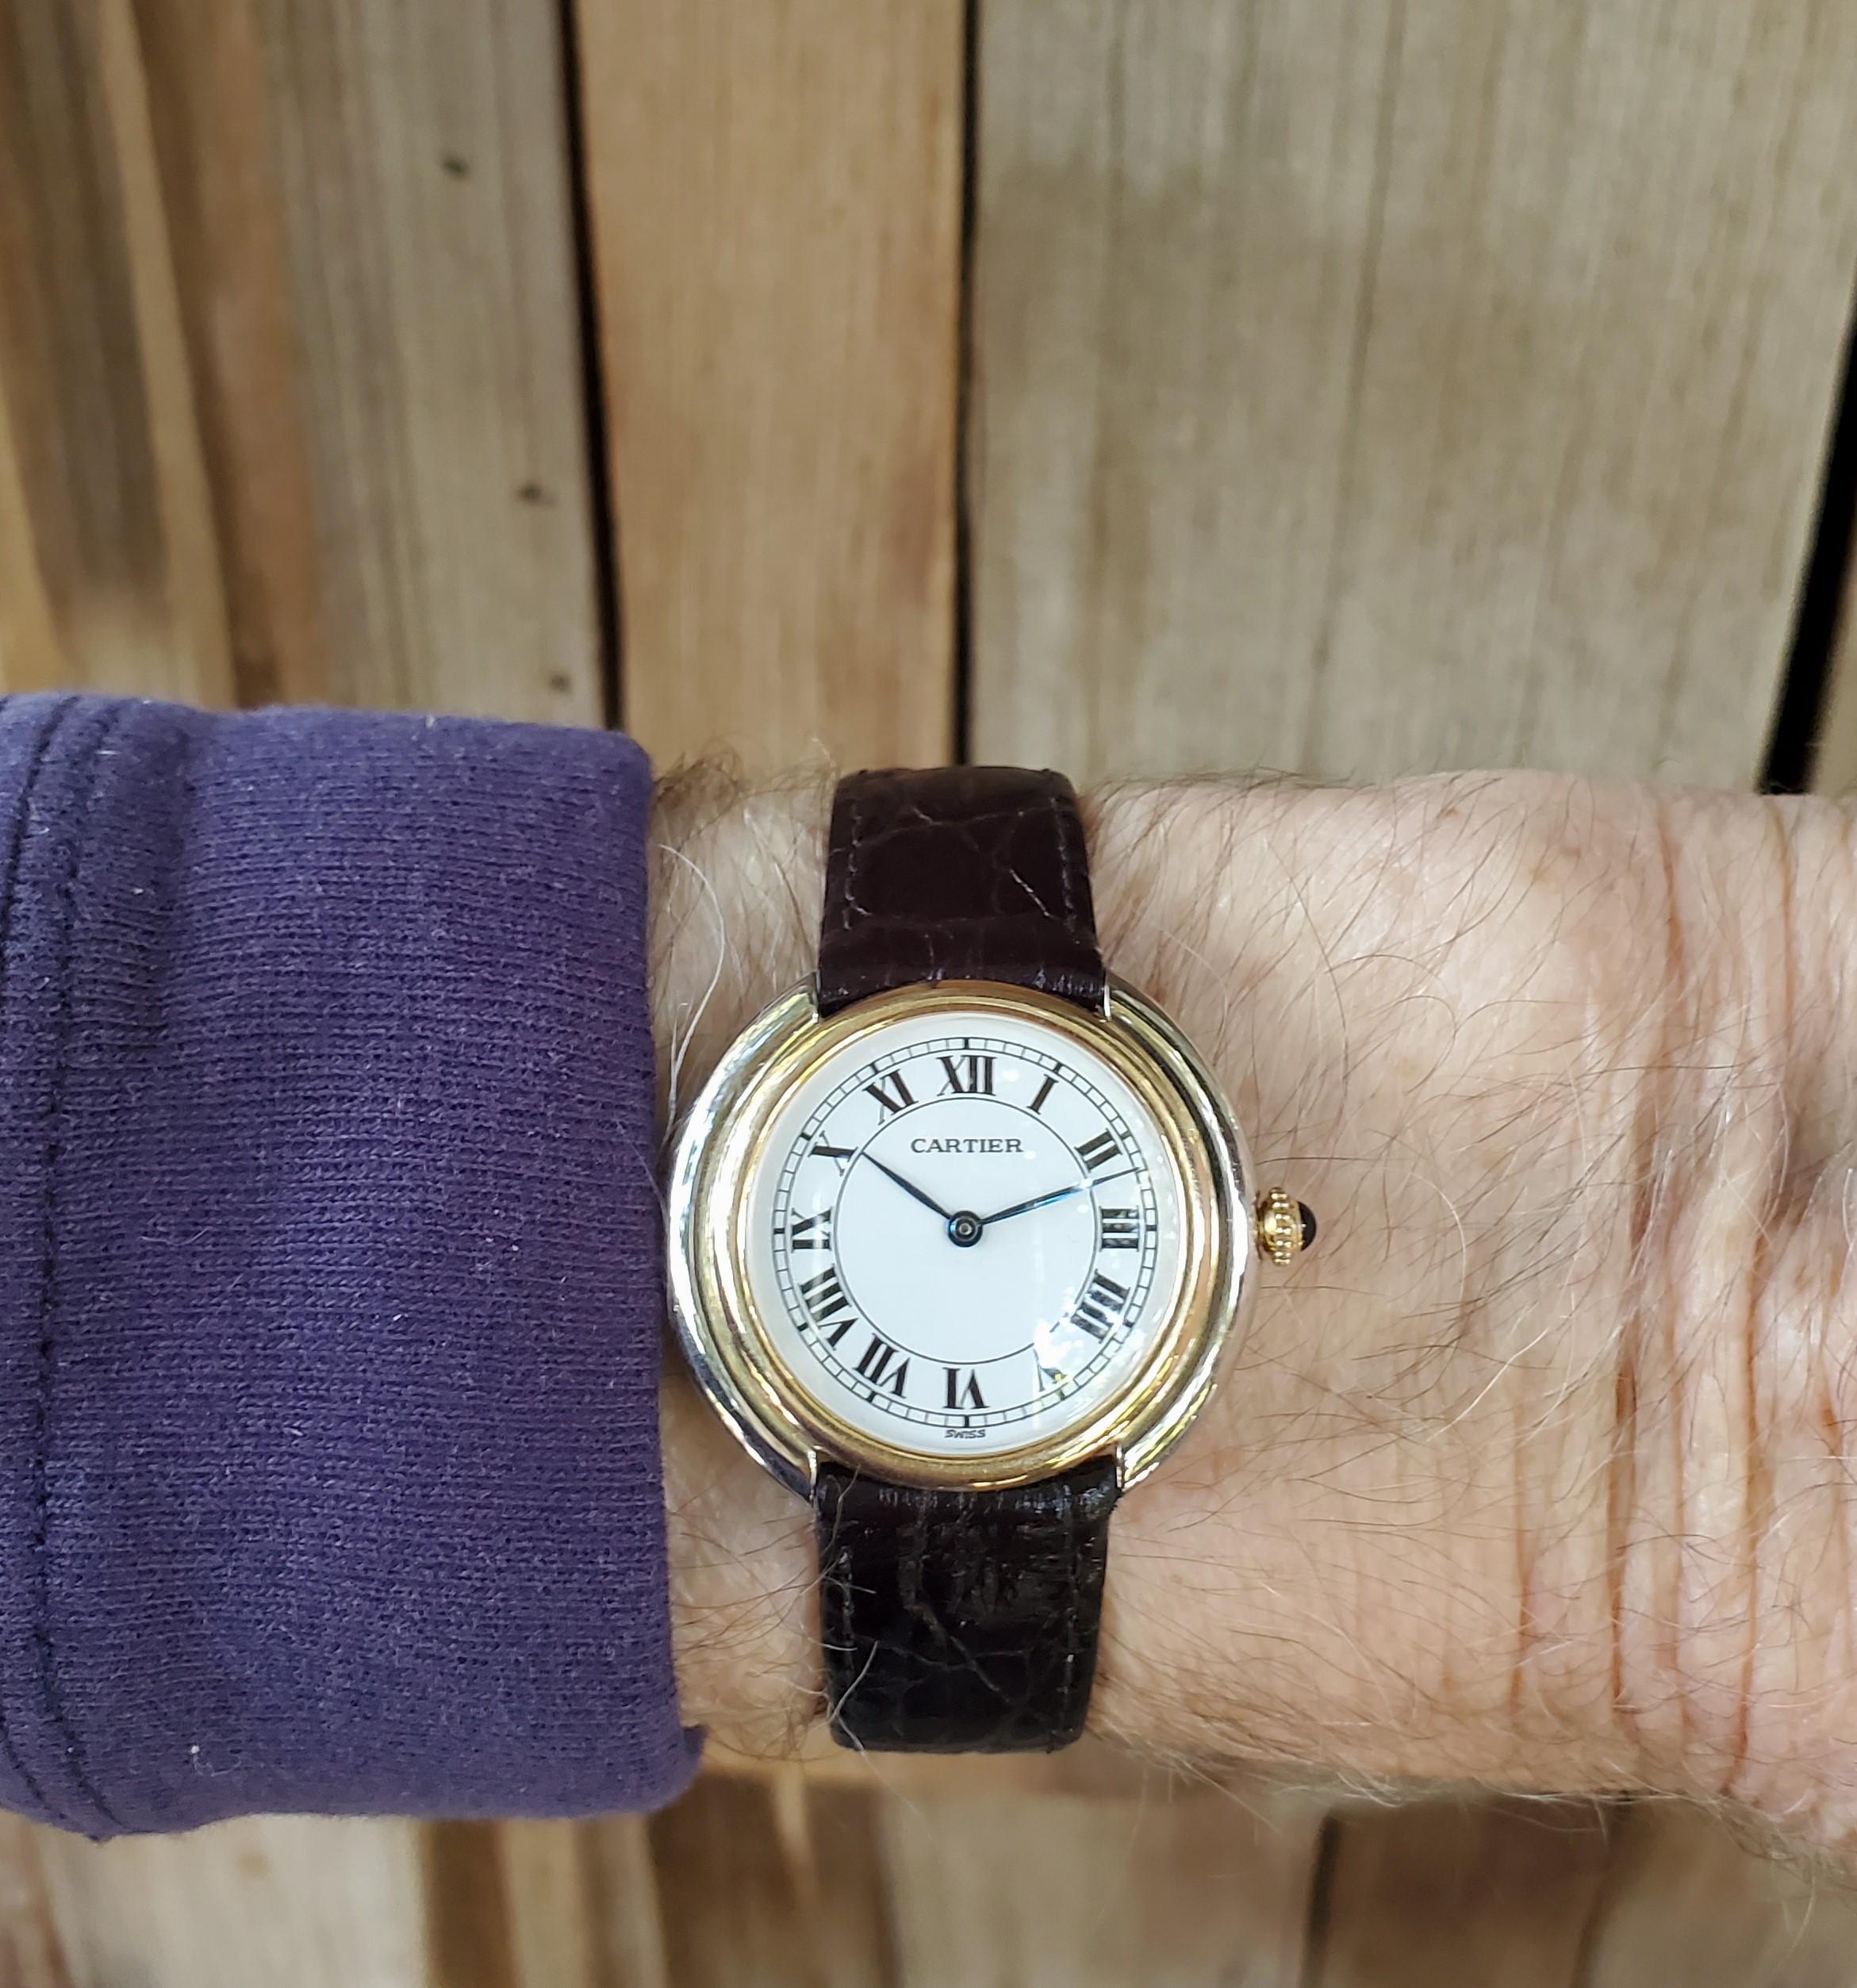 Introduction:
This Vintage Cartier Paris Vendome watch is the extra large size, and measures 34mm;  circa 1973-1976.  The watch is made in 18 Karat yellow and white gold.  The watch is fitted  with an 17-jewel manual wind movement.  The watch has a